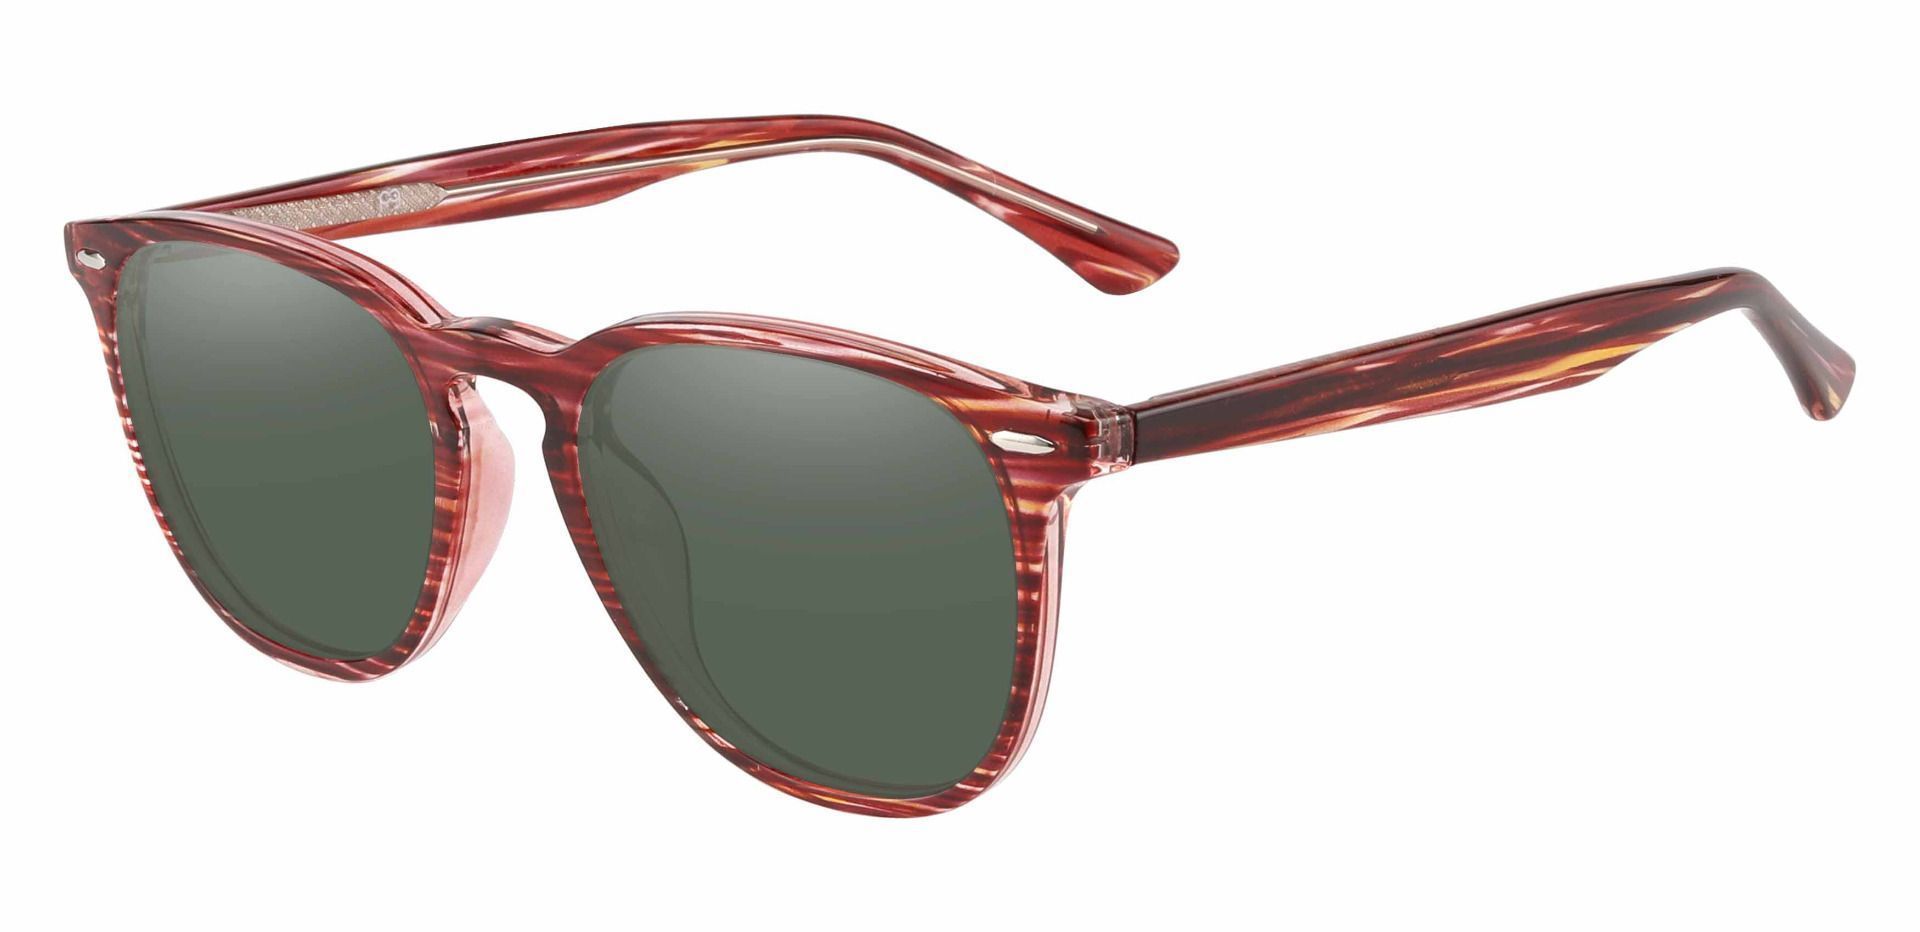 Sycamore Oval Prescription Sunglasses - Red Frame With Green Lenses